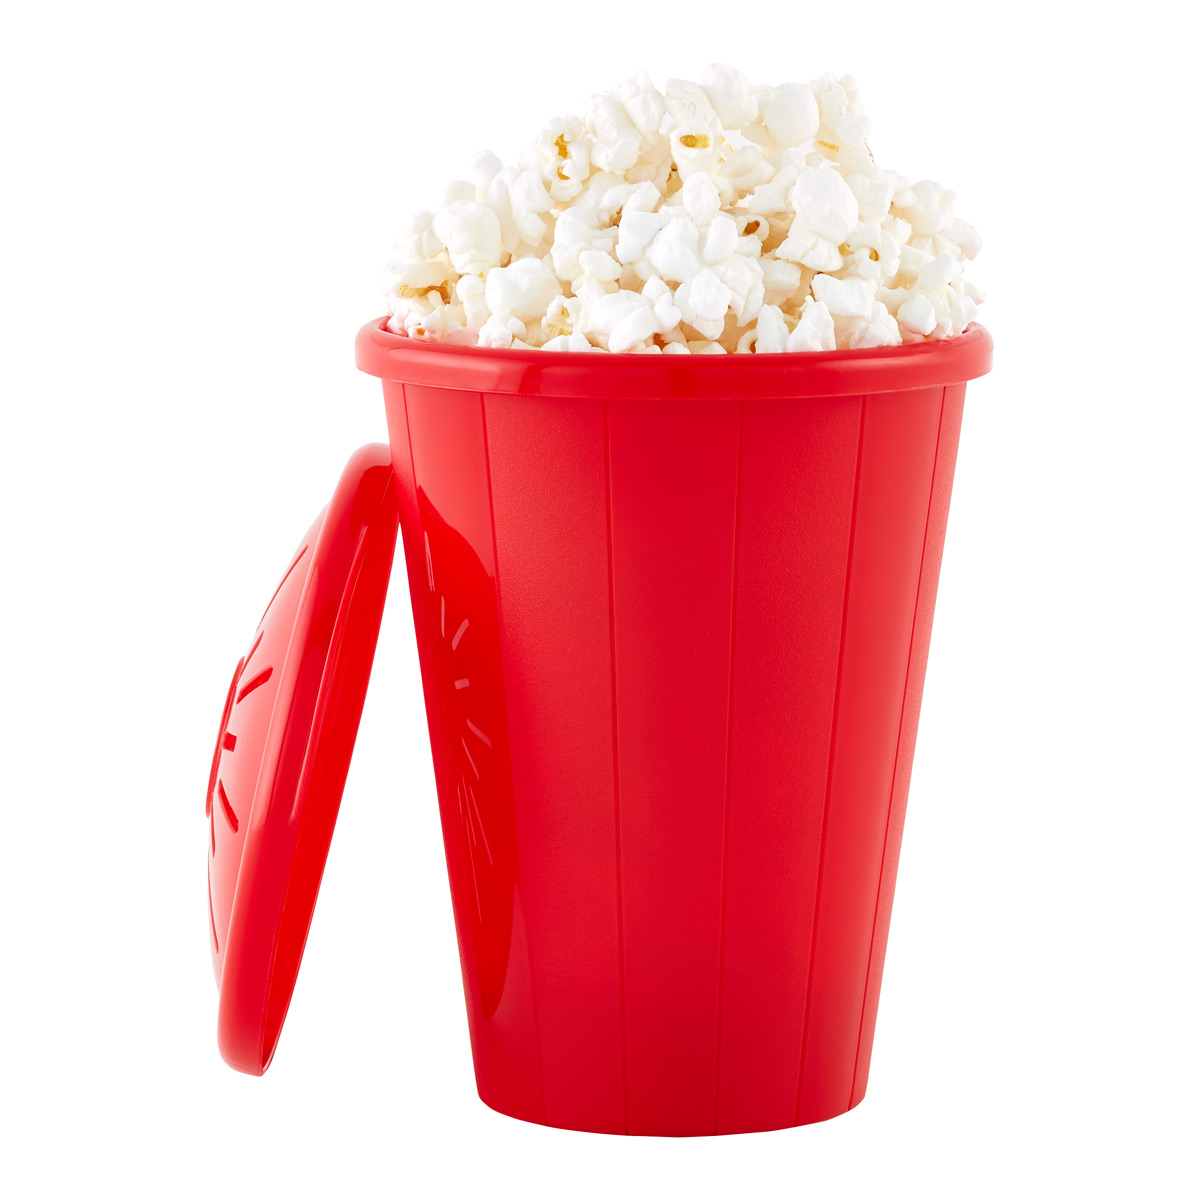 Microwave Popcorn Maker | The Container Store